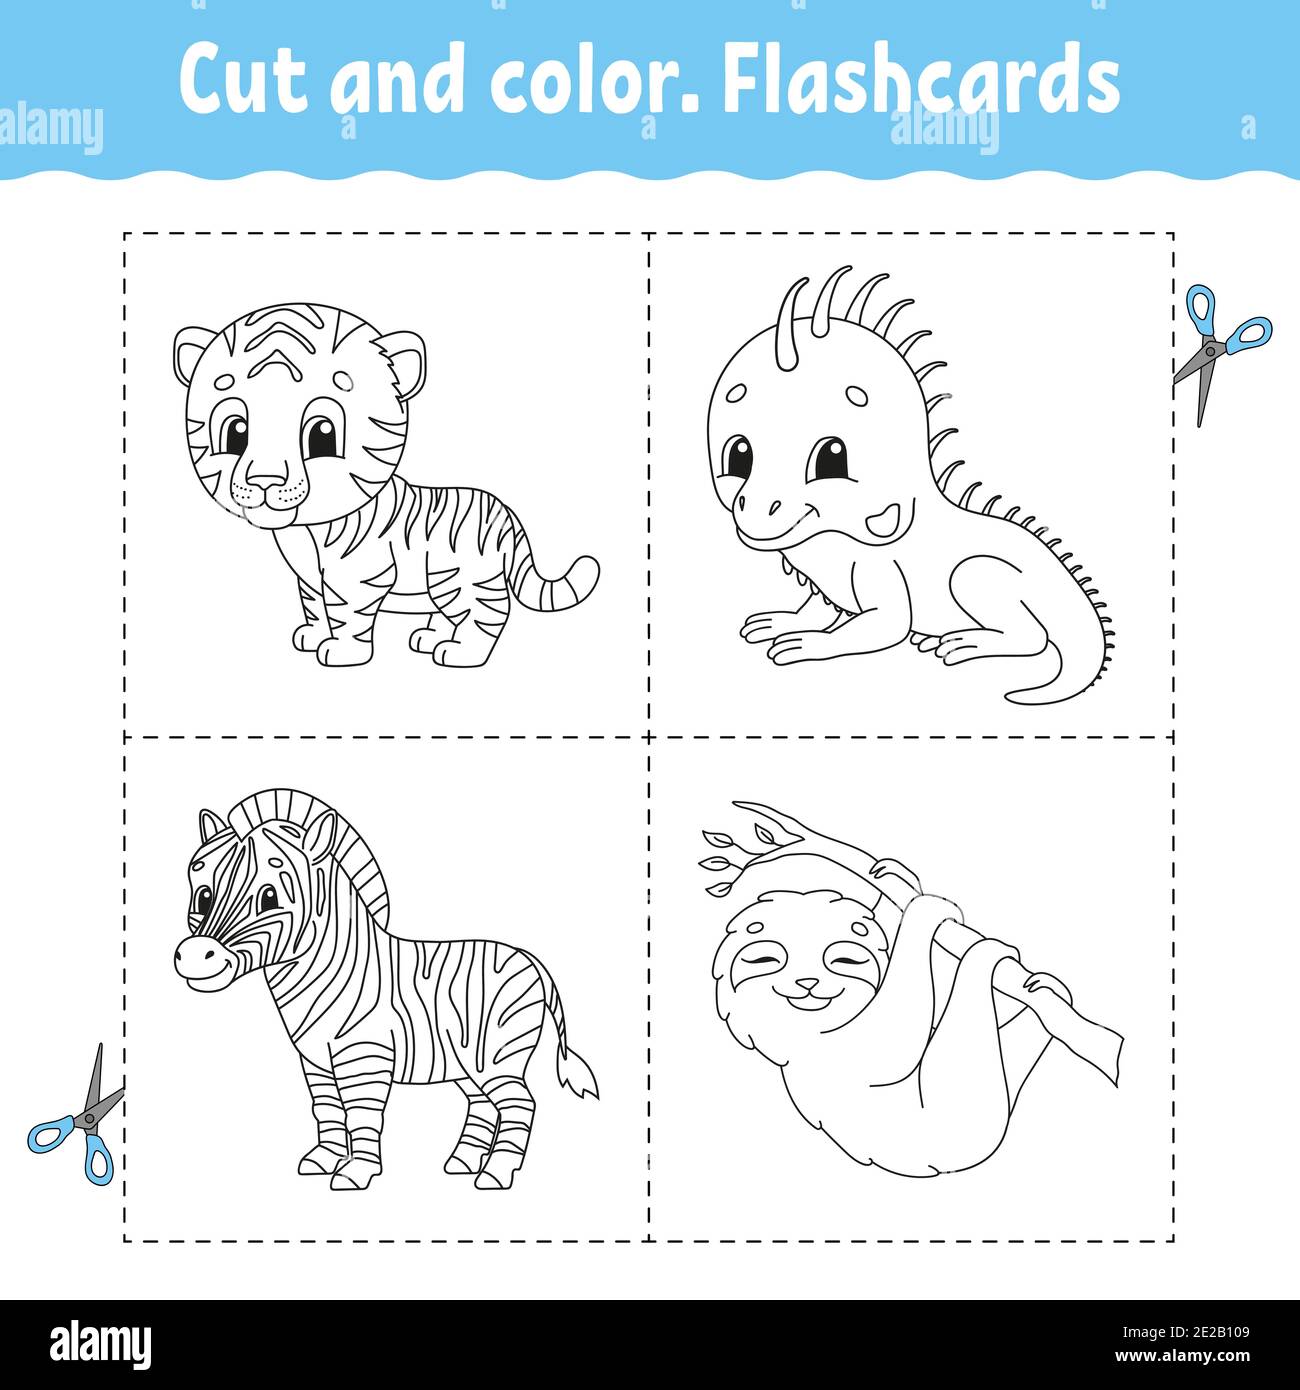 Cut and color. Flashcard Set. tiger, iguana, sloth, zebra. Coloring book for kids. Cartoon character. Cute animal. Stock Vector